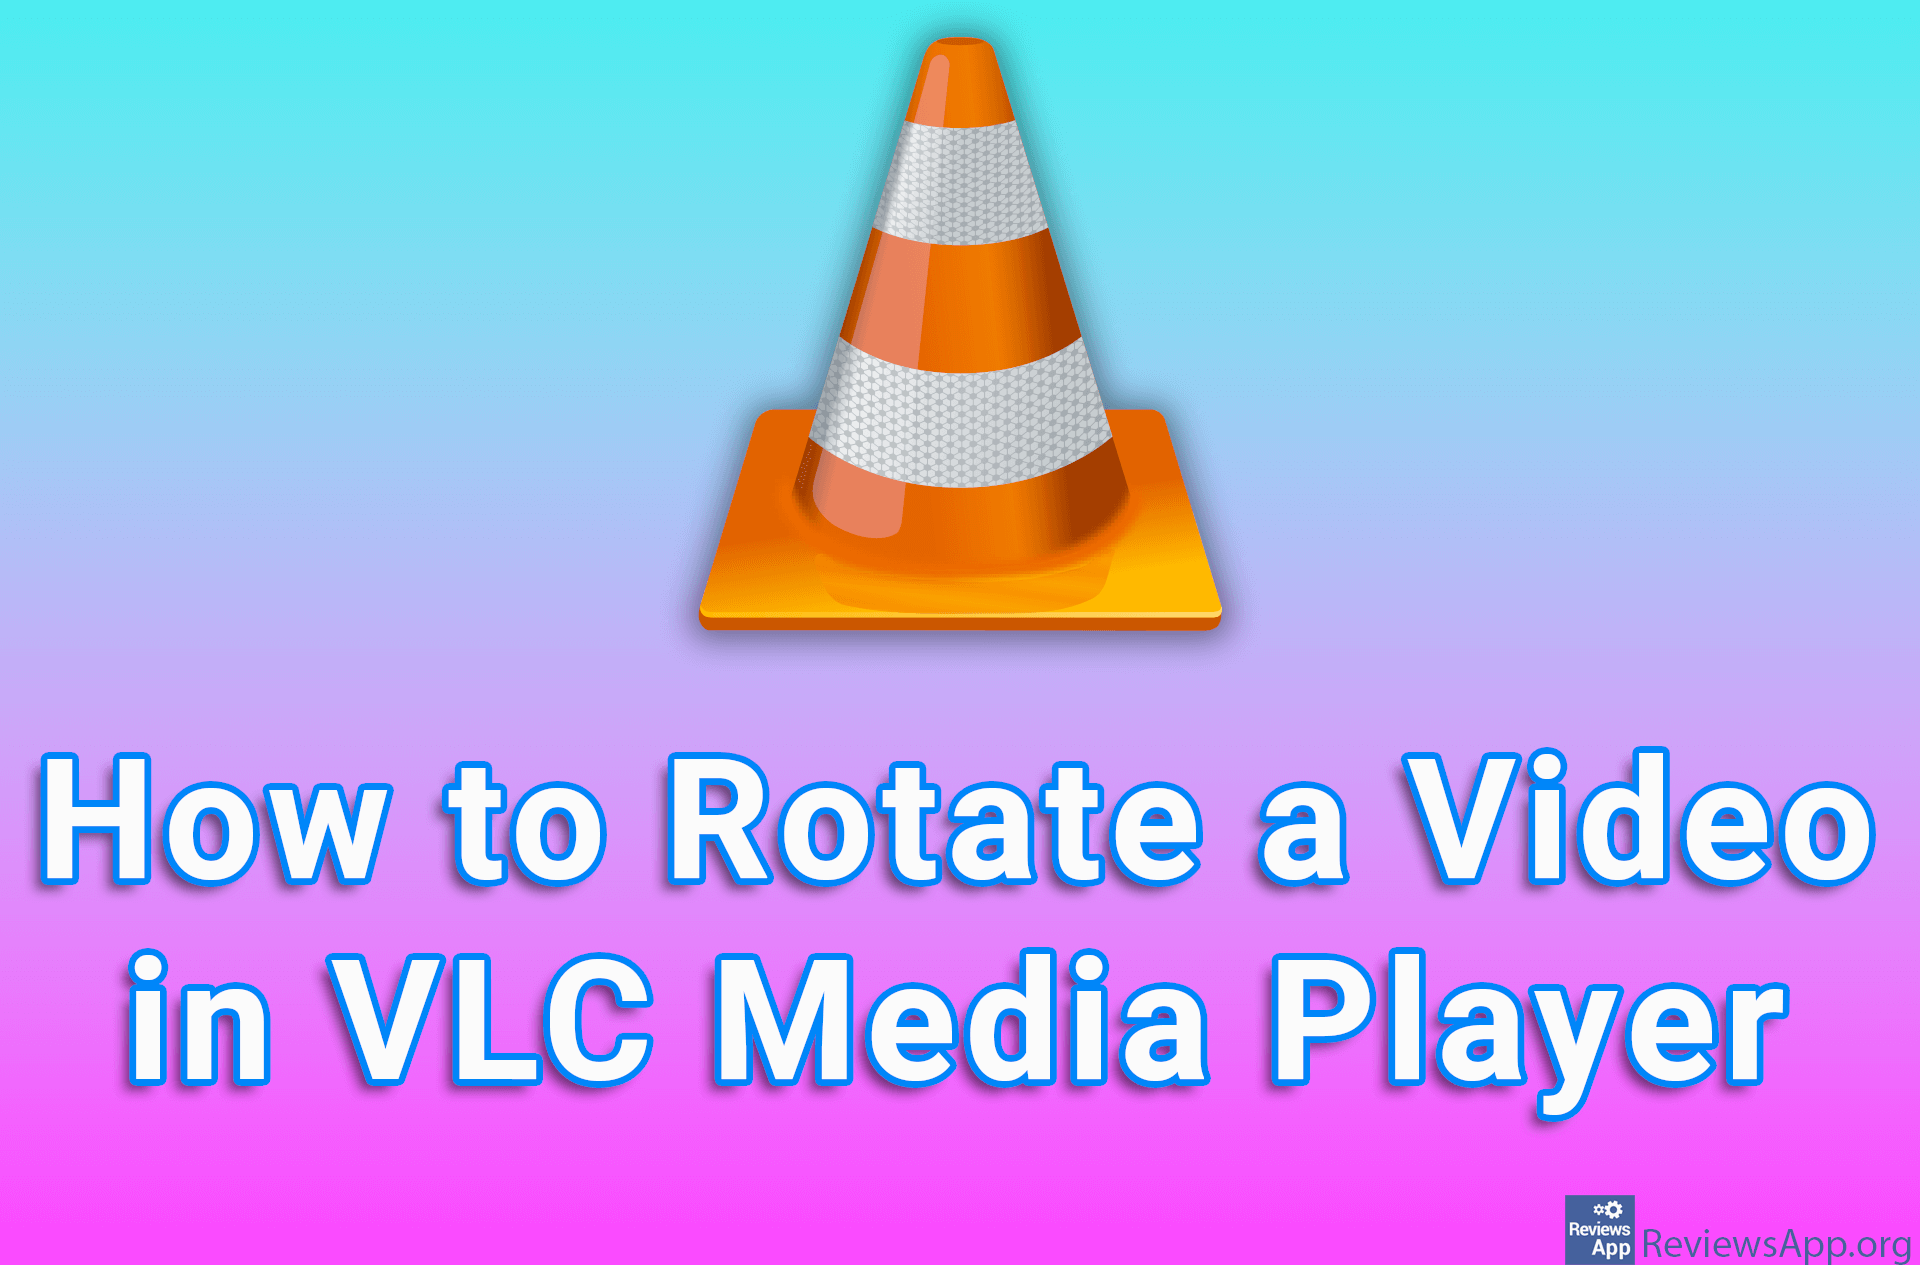 How to Rotate a Video in VLC Media Player